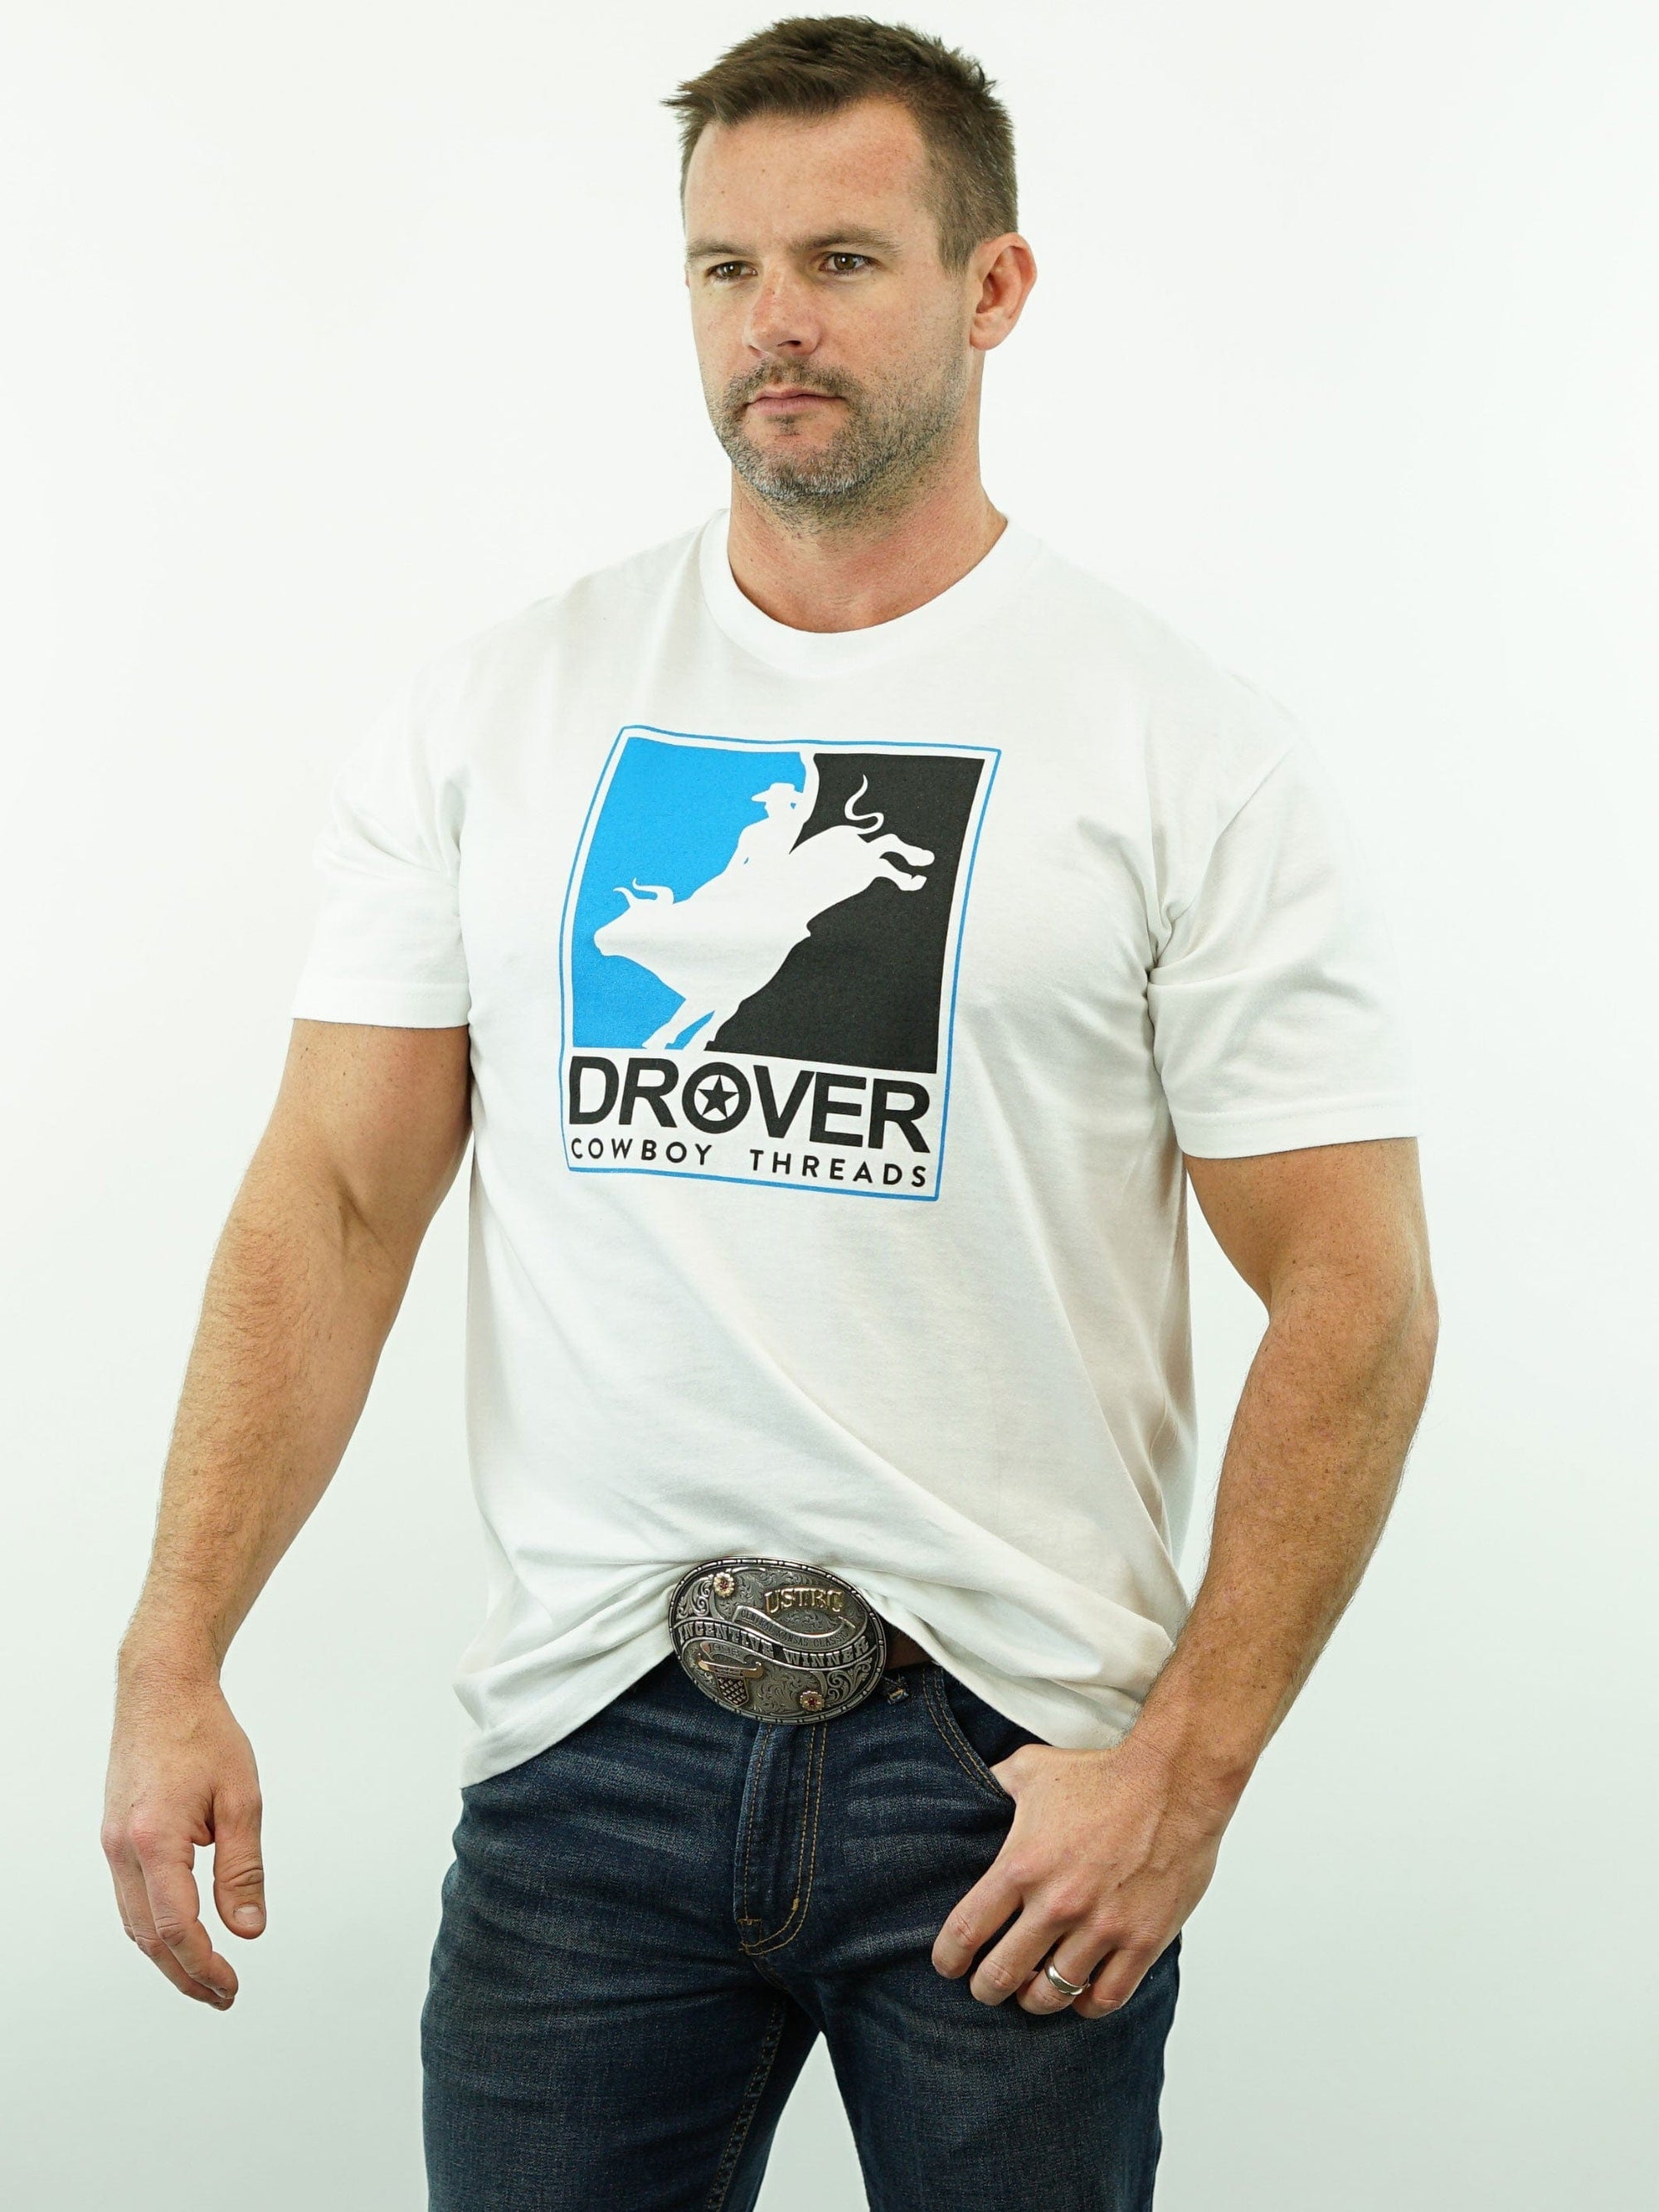 Drover Cowboy Threads Shirts M T-Shirt - Drover Rodeo - White